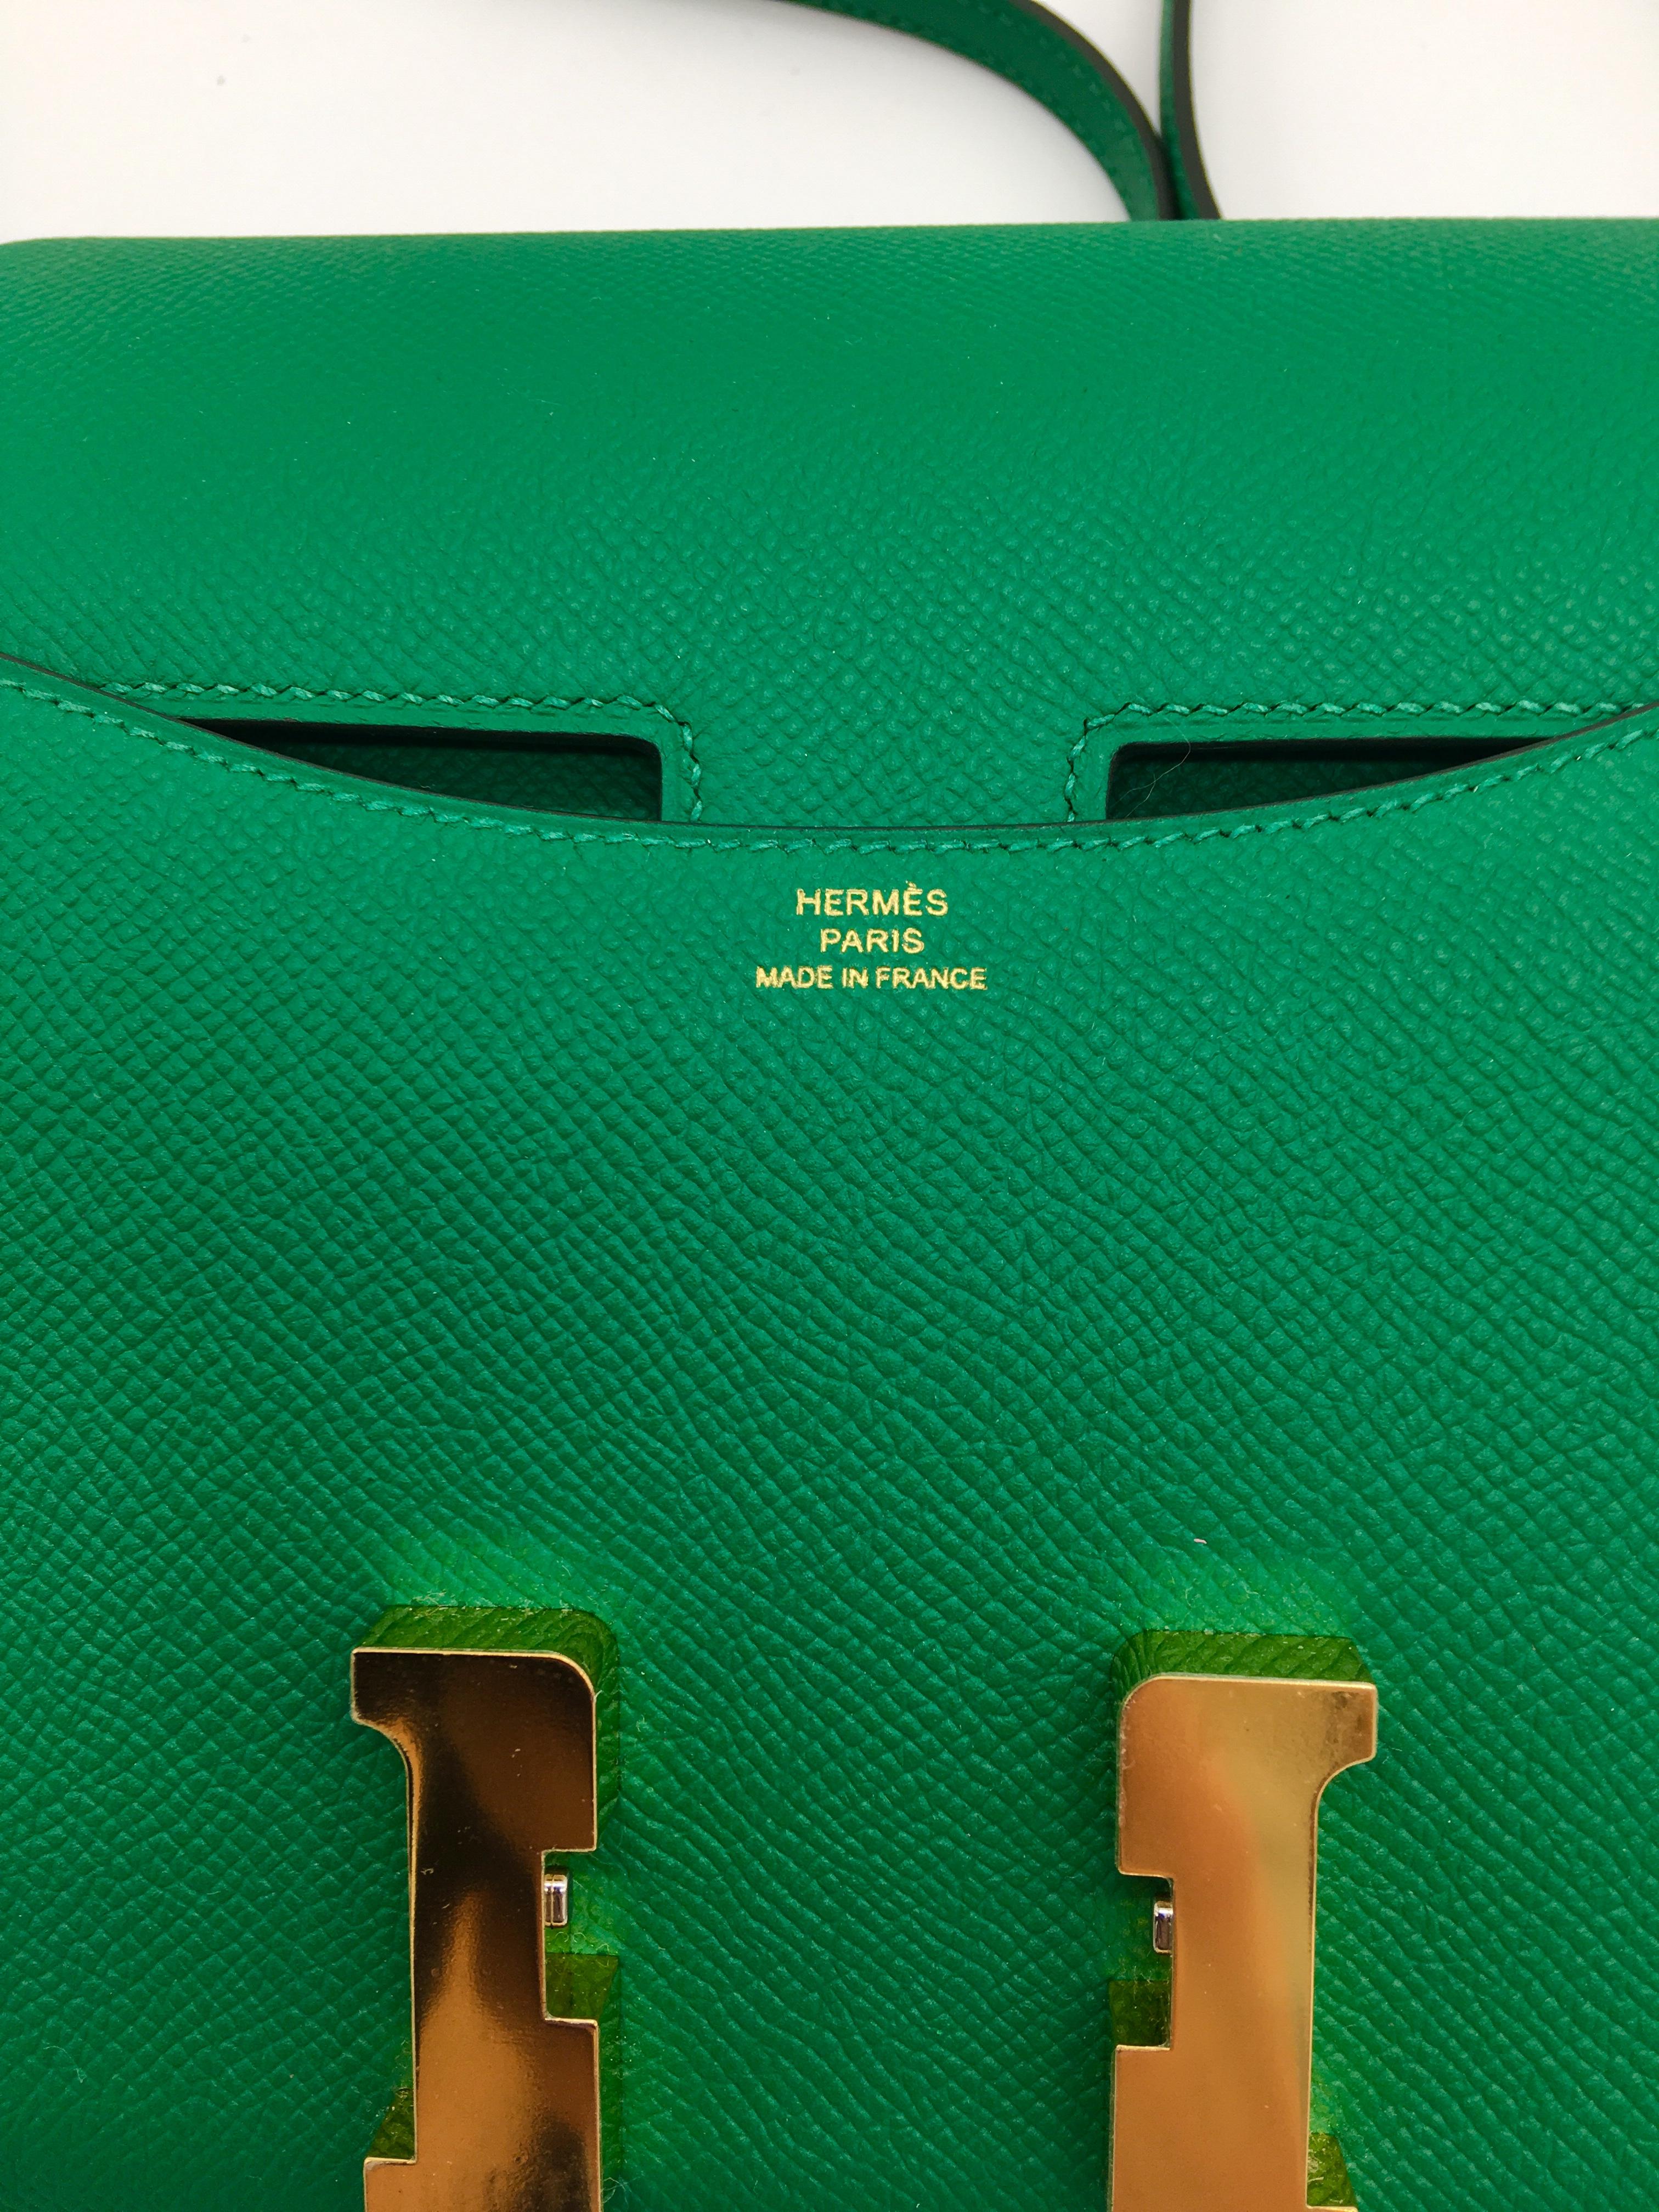 Vert Vertigo is a super vibrant green which will bring a great pop of colour to whatever your wearing.  Hermes do not seem to develop as many greens as other colours so a new addition is always welcome, and Vert Vertigo is one of the best.   Based